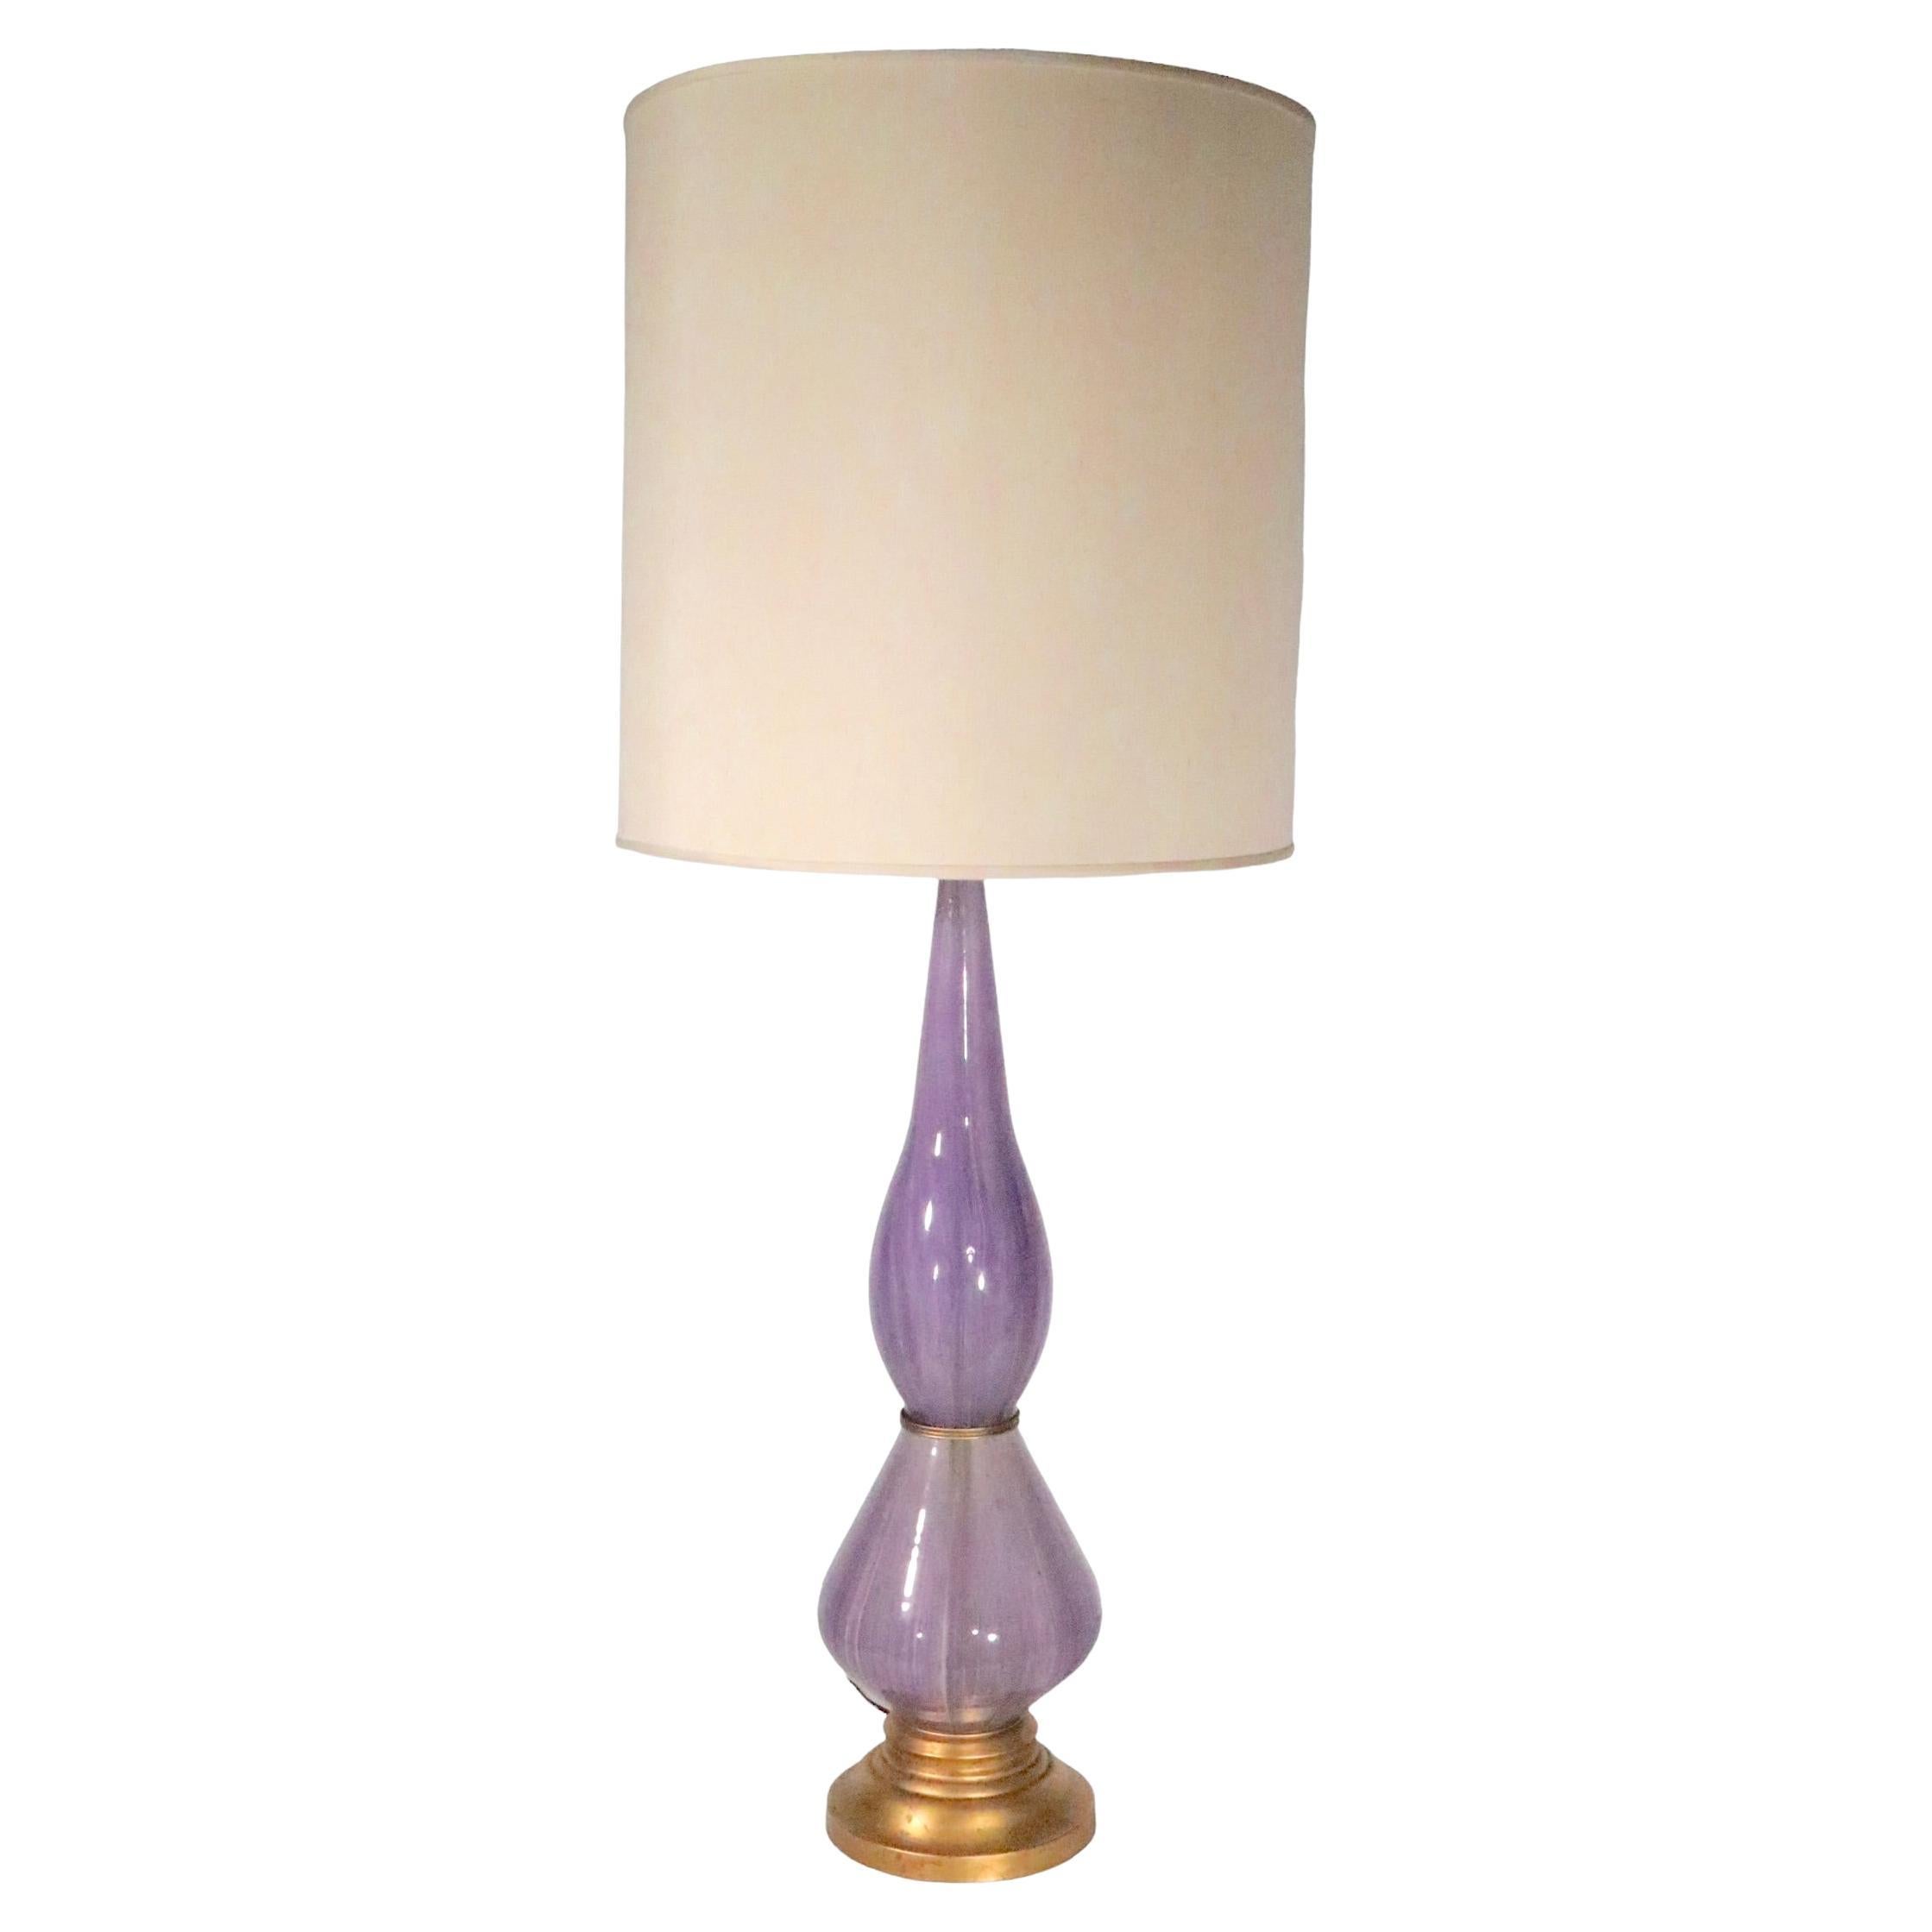 Large Murano Glass Table Lamp in Lavender Glass, circa 1950/1960s For Sale